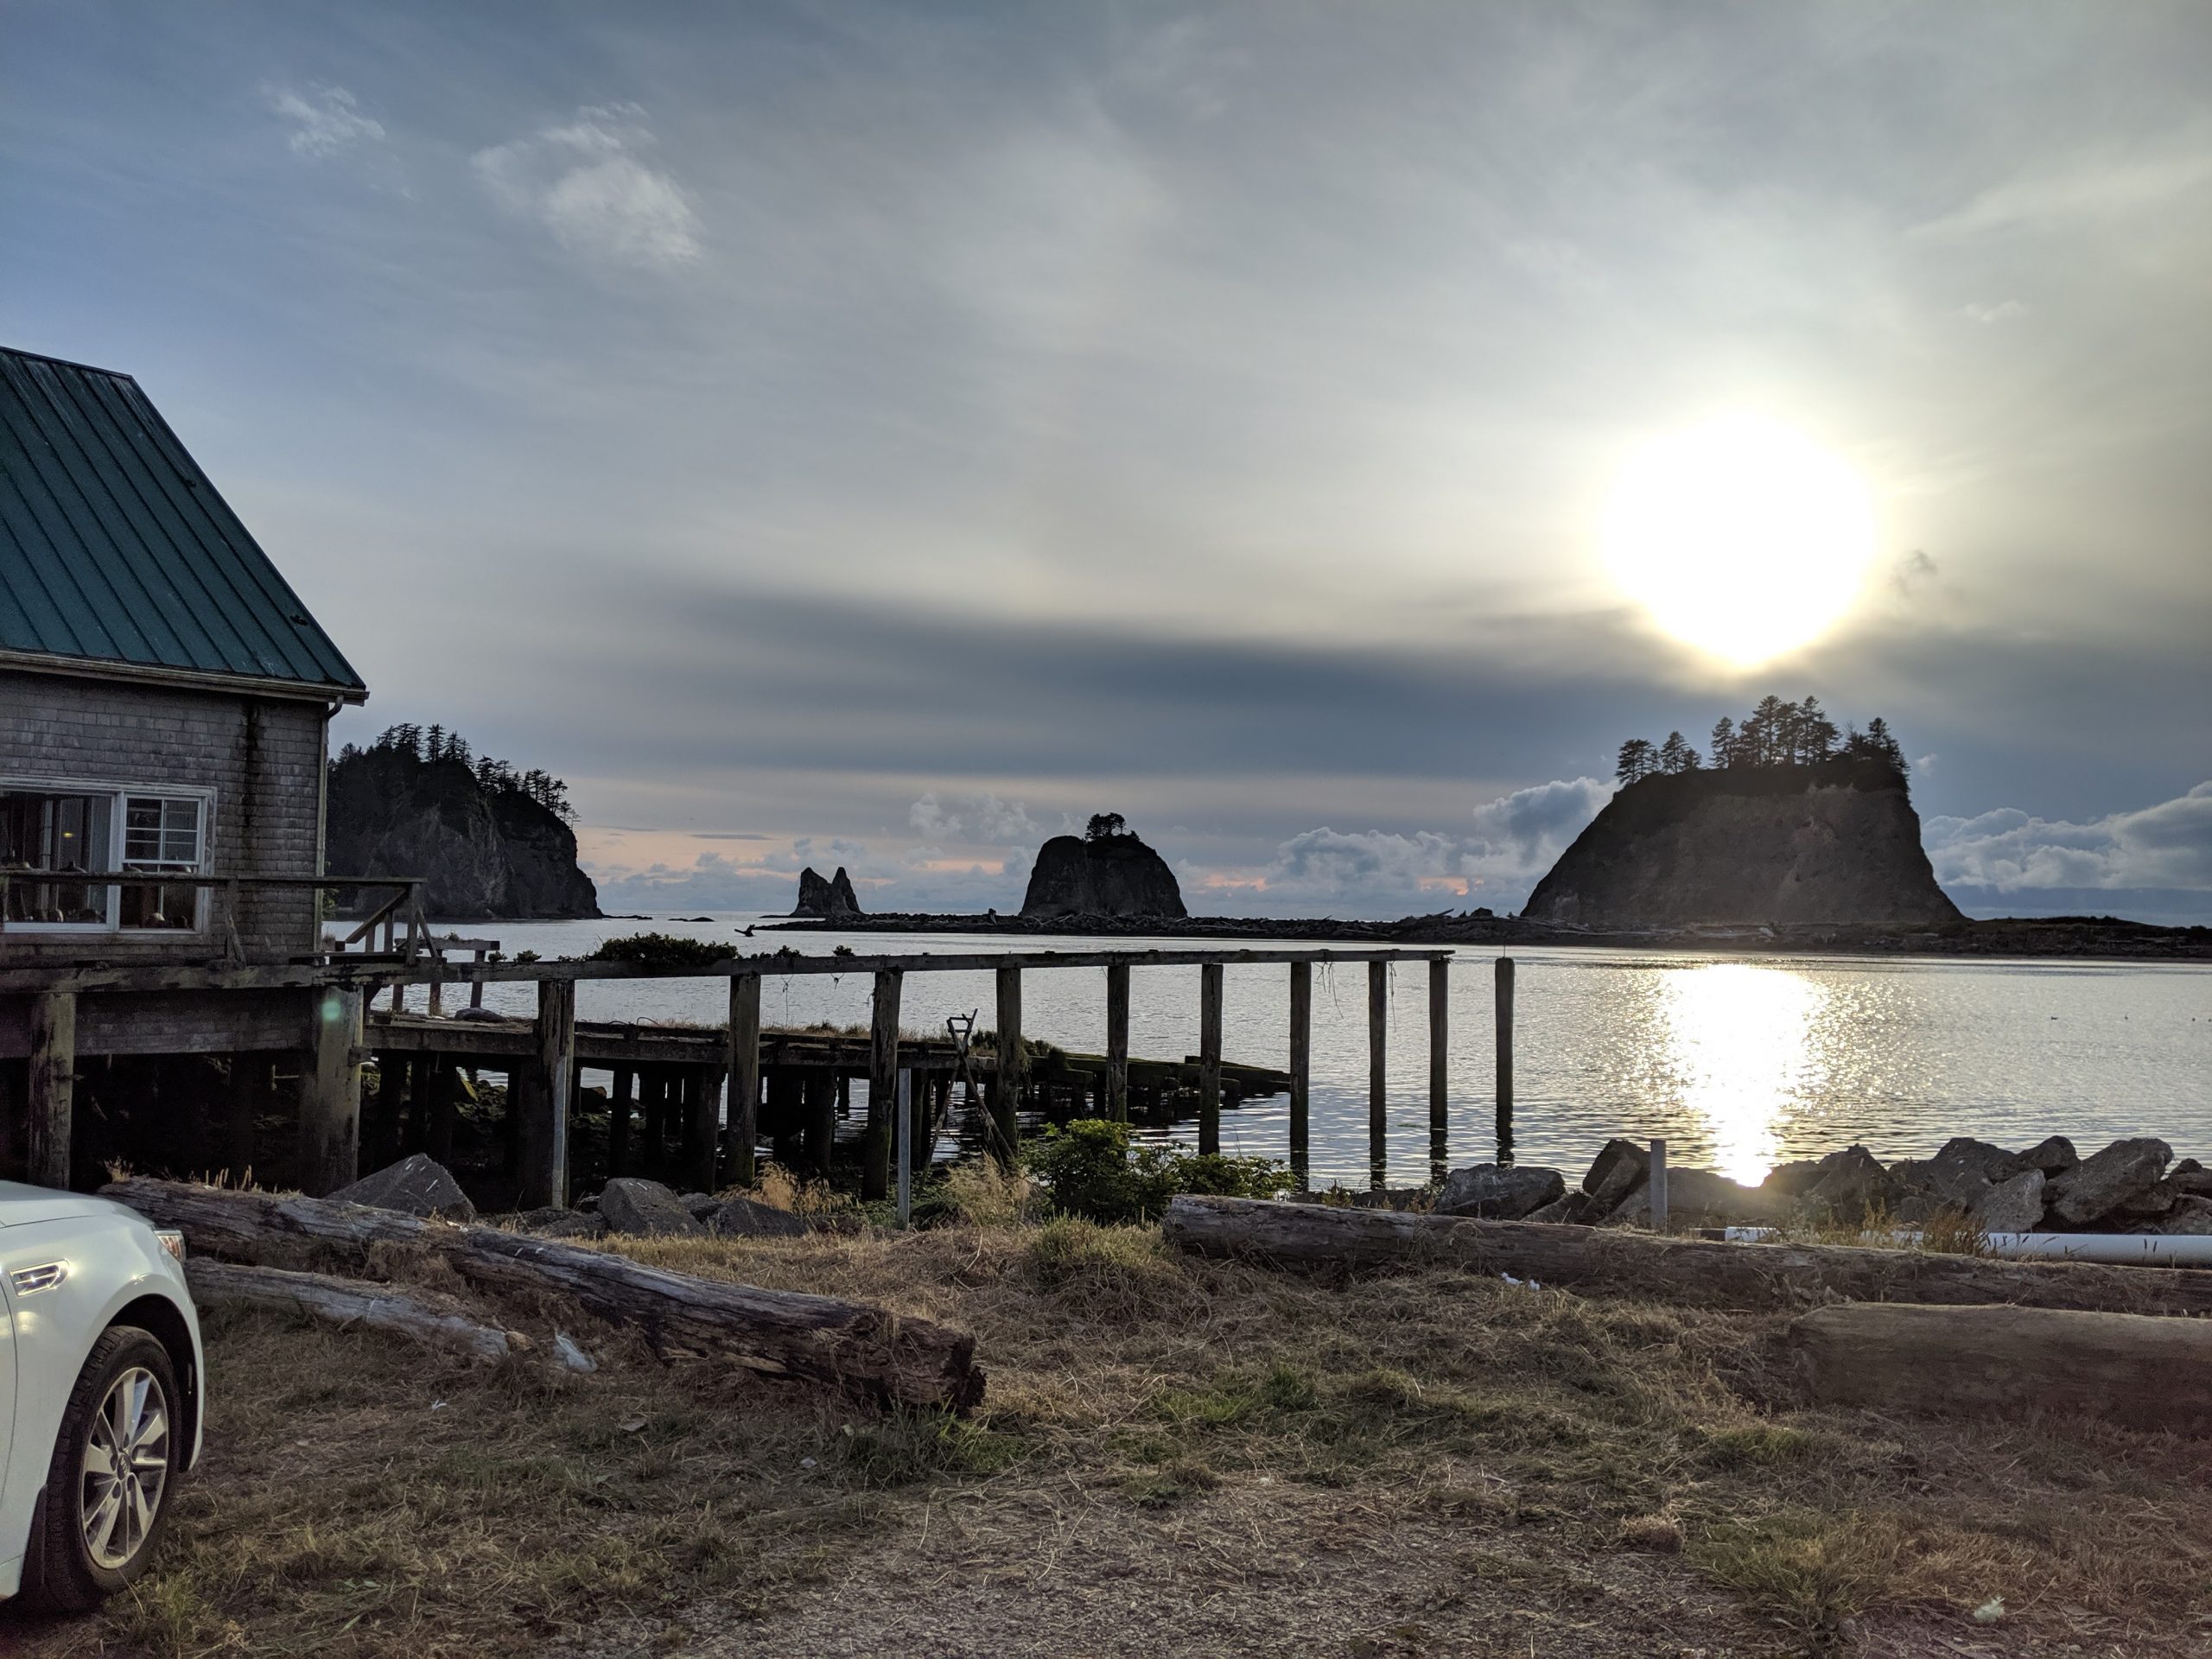 Quileute Tribe embraces chance to tell its story